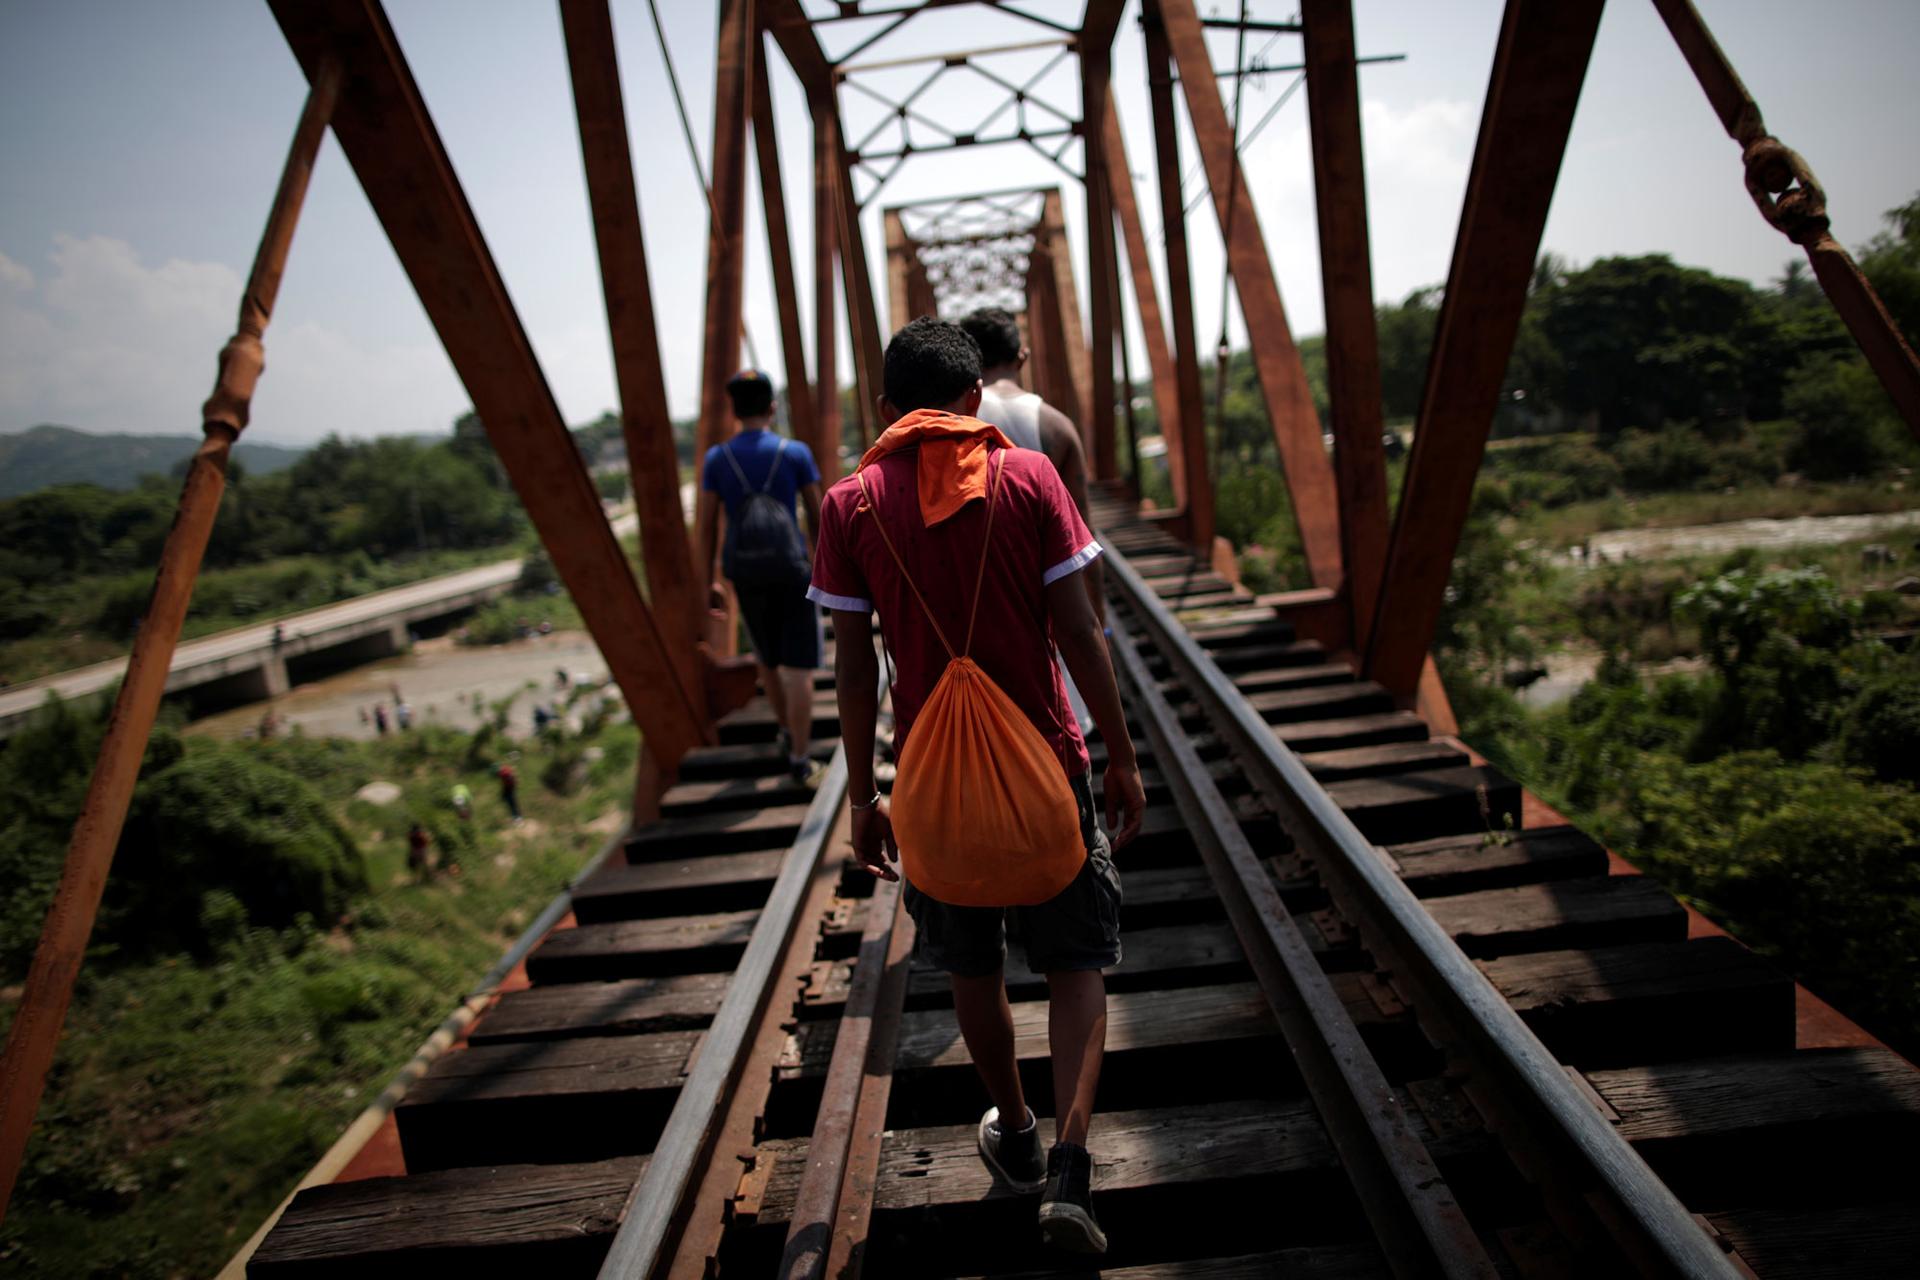 Migrants are shown walking along train tracks with their backs to the camera in Arriaga, Mexico Oct. 26, 2018.